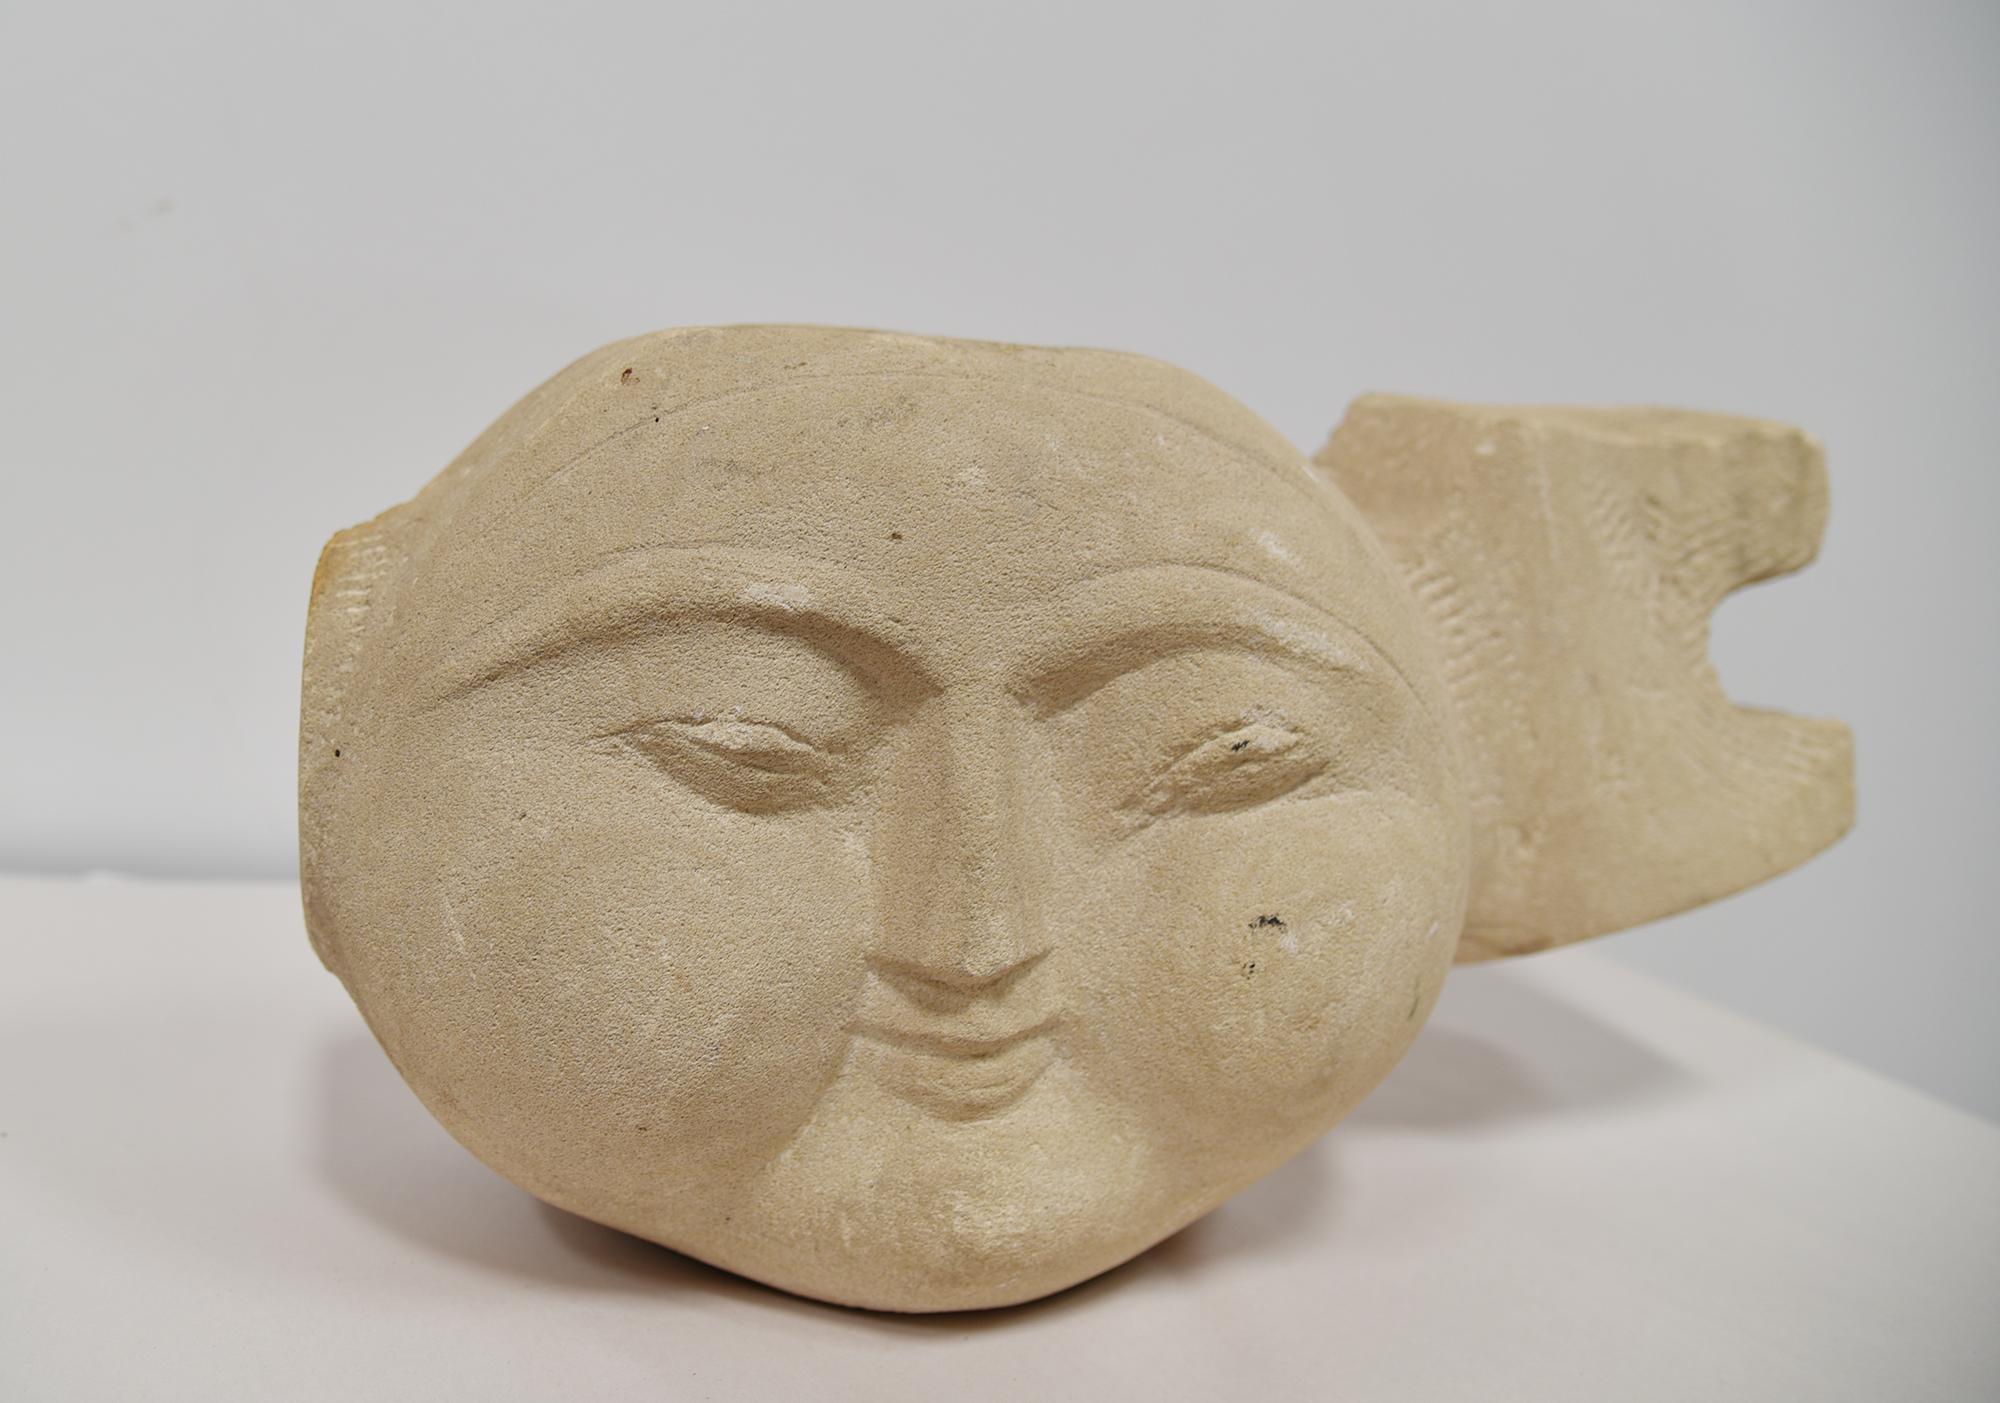 A hand-carved sculpture in sandstone styled after the head of DIRACCA from an unknown artist in Spain, circa 1940. This piece is stylized and attributed to Diracca from Spain in 1940. The site offers no possibility of listing this artist's name.